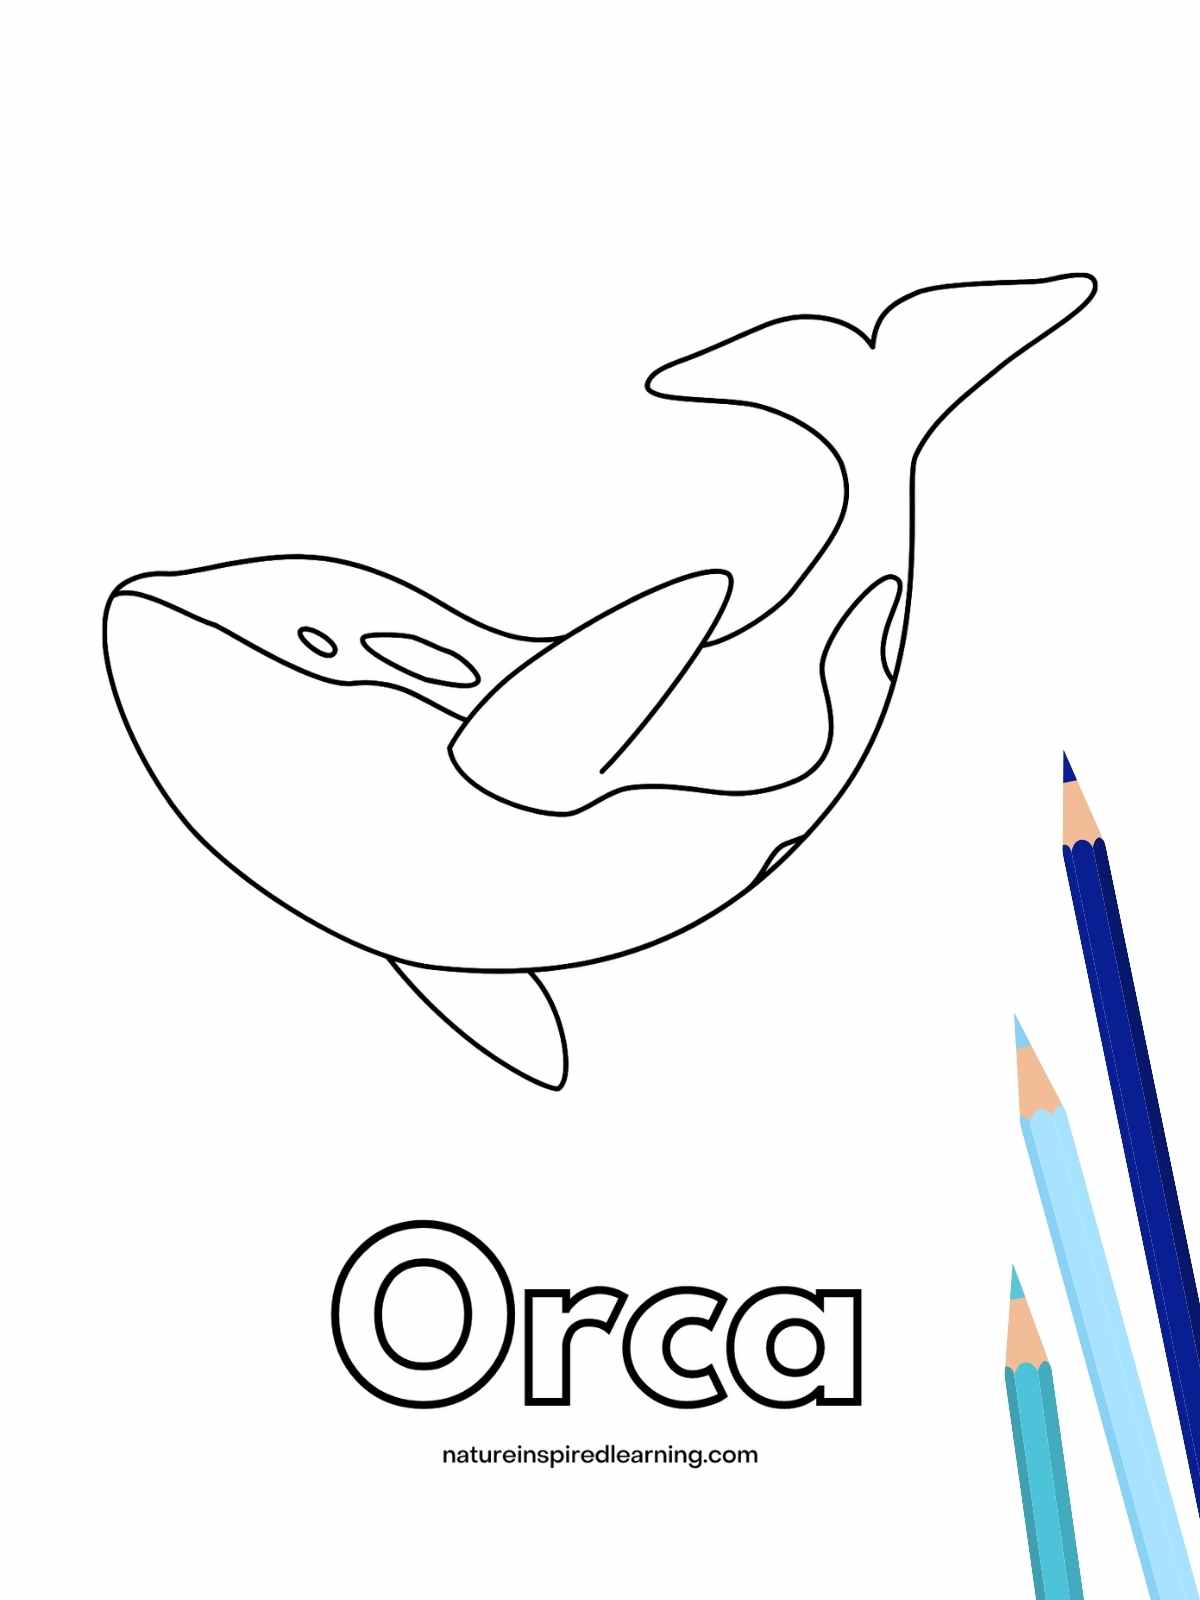 Orca coloring pages for kids